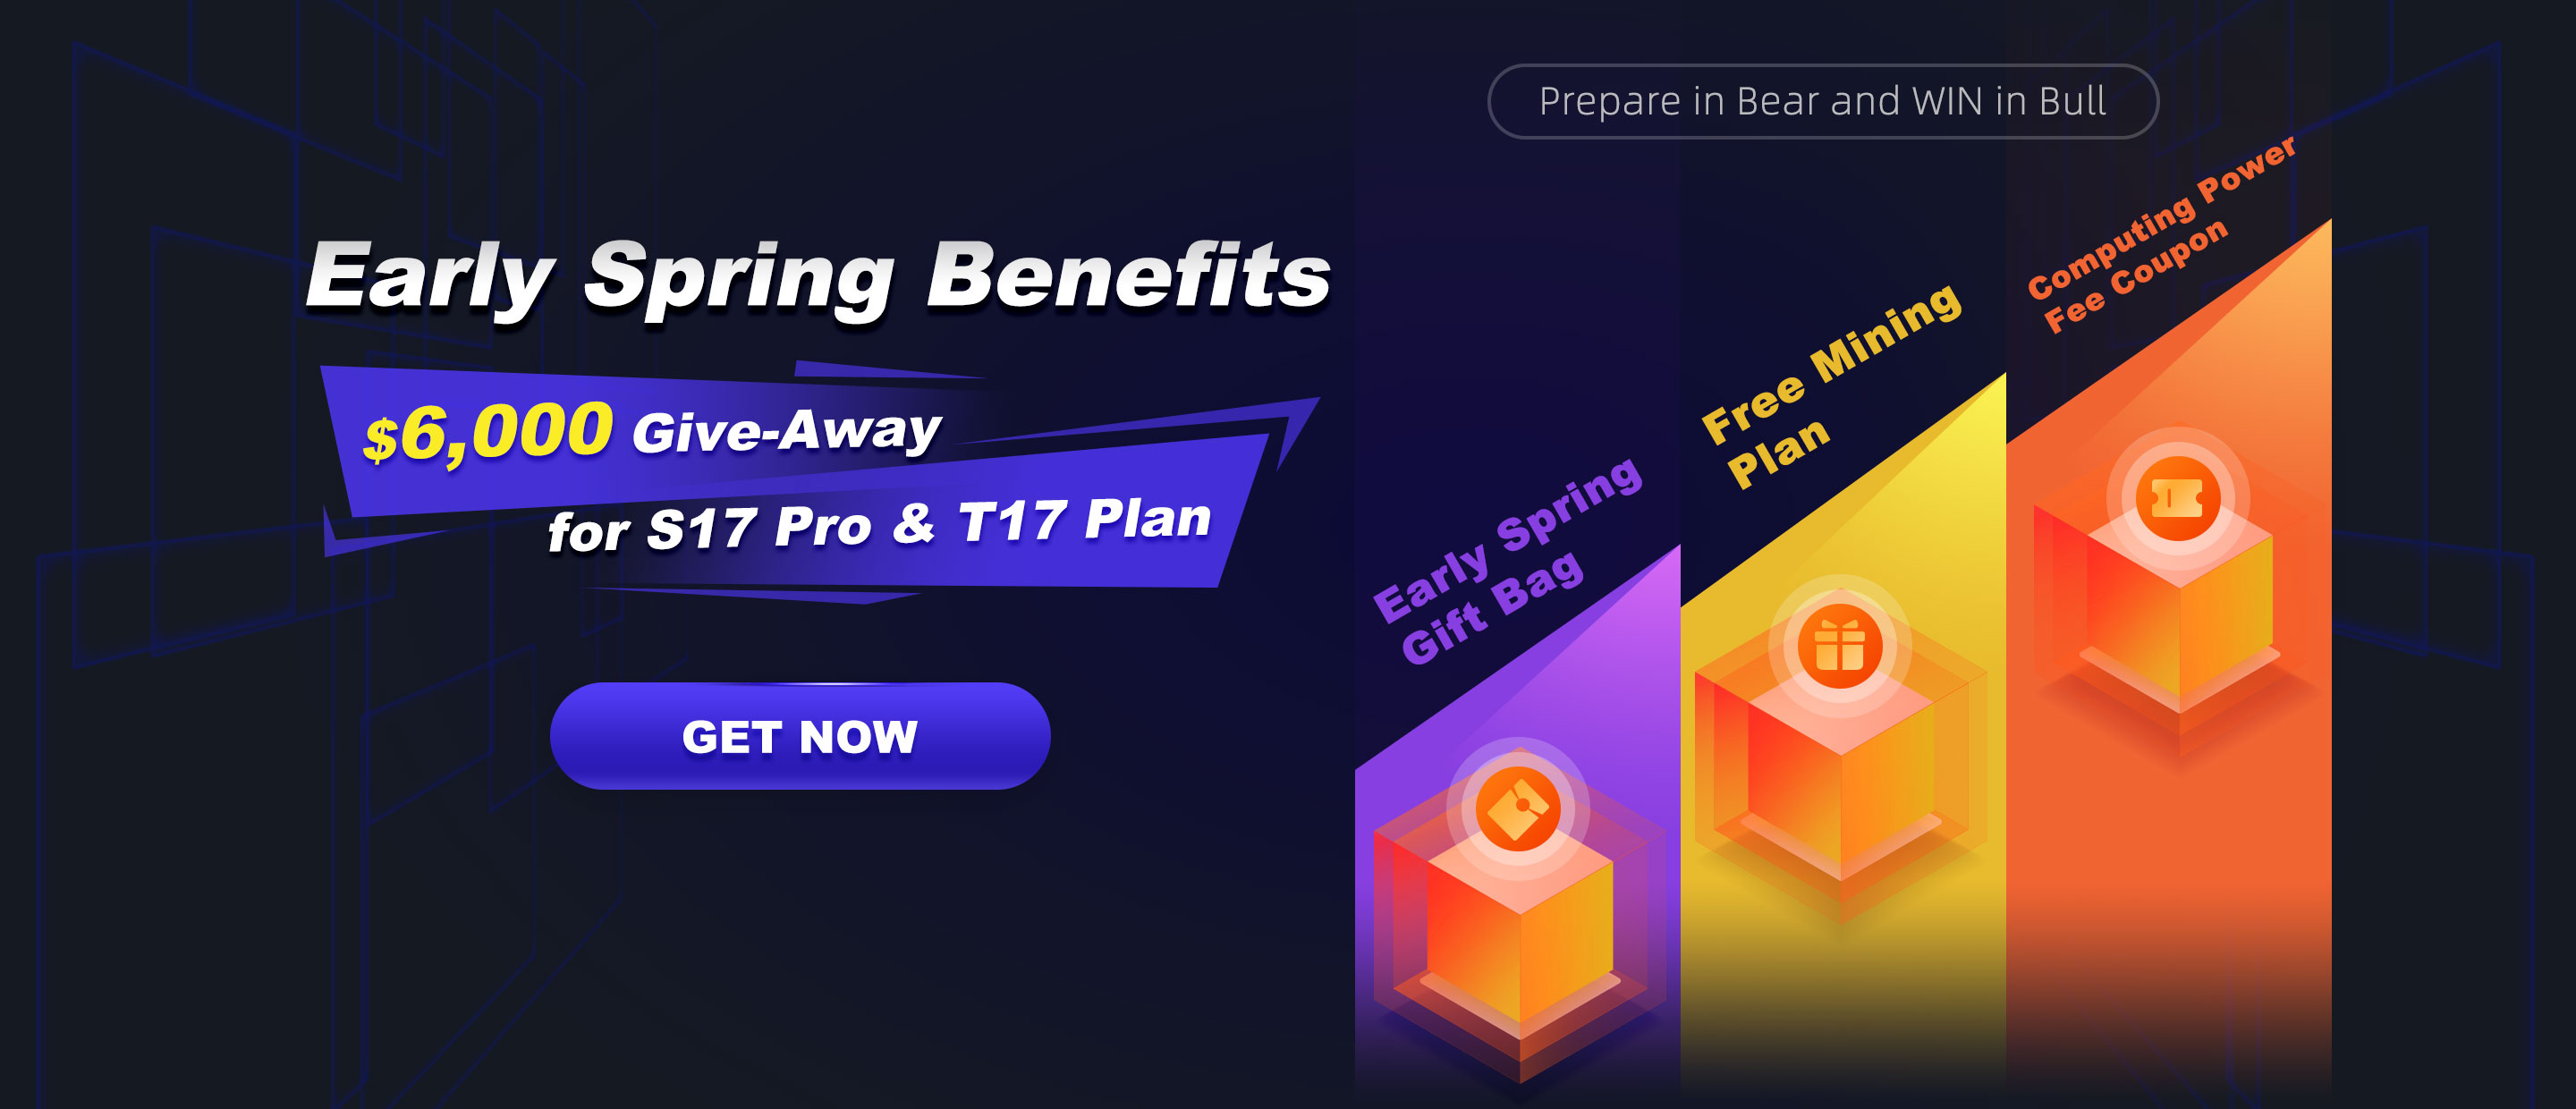 Bitdeer.com Launches Massive Early Spring Event